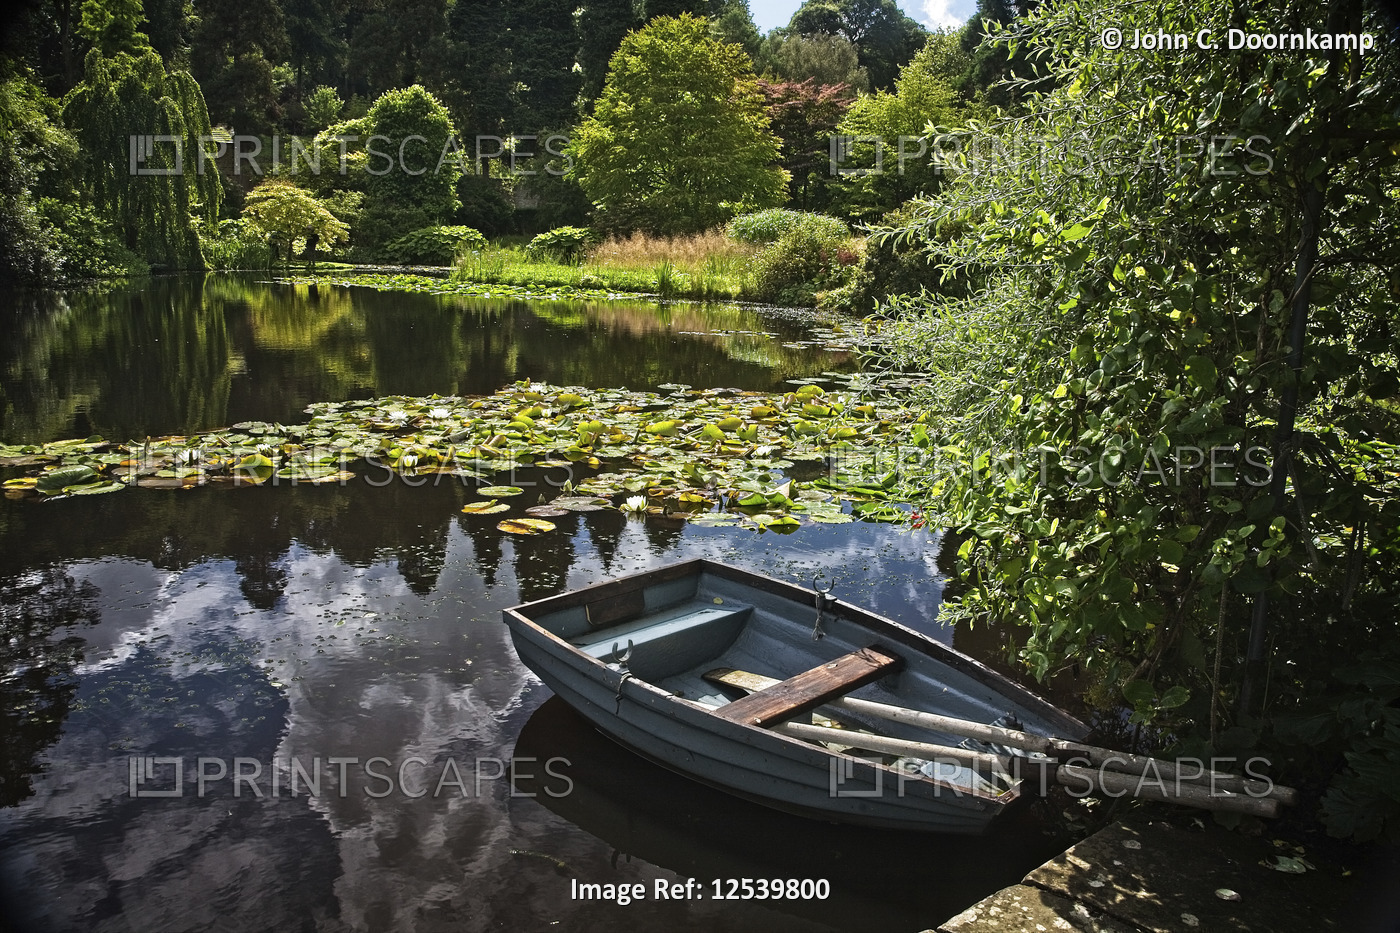 A MOORED BOAT ON A LARGE GARDEN POND IN ENGLAND